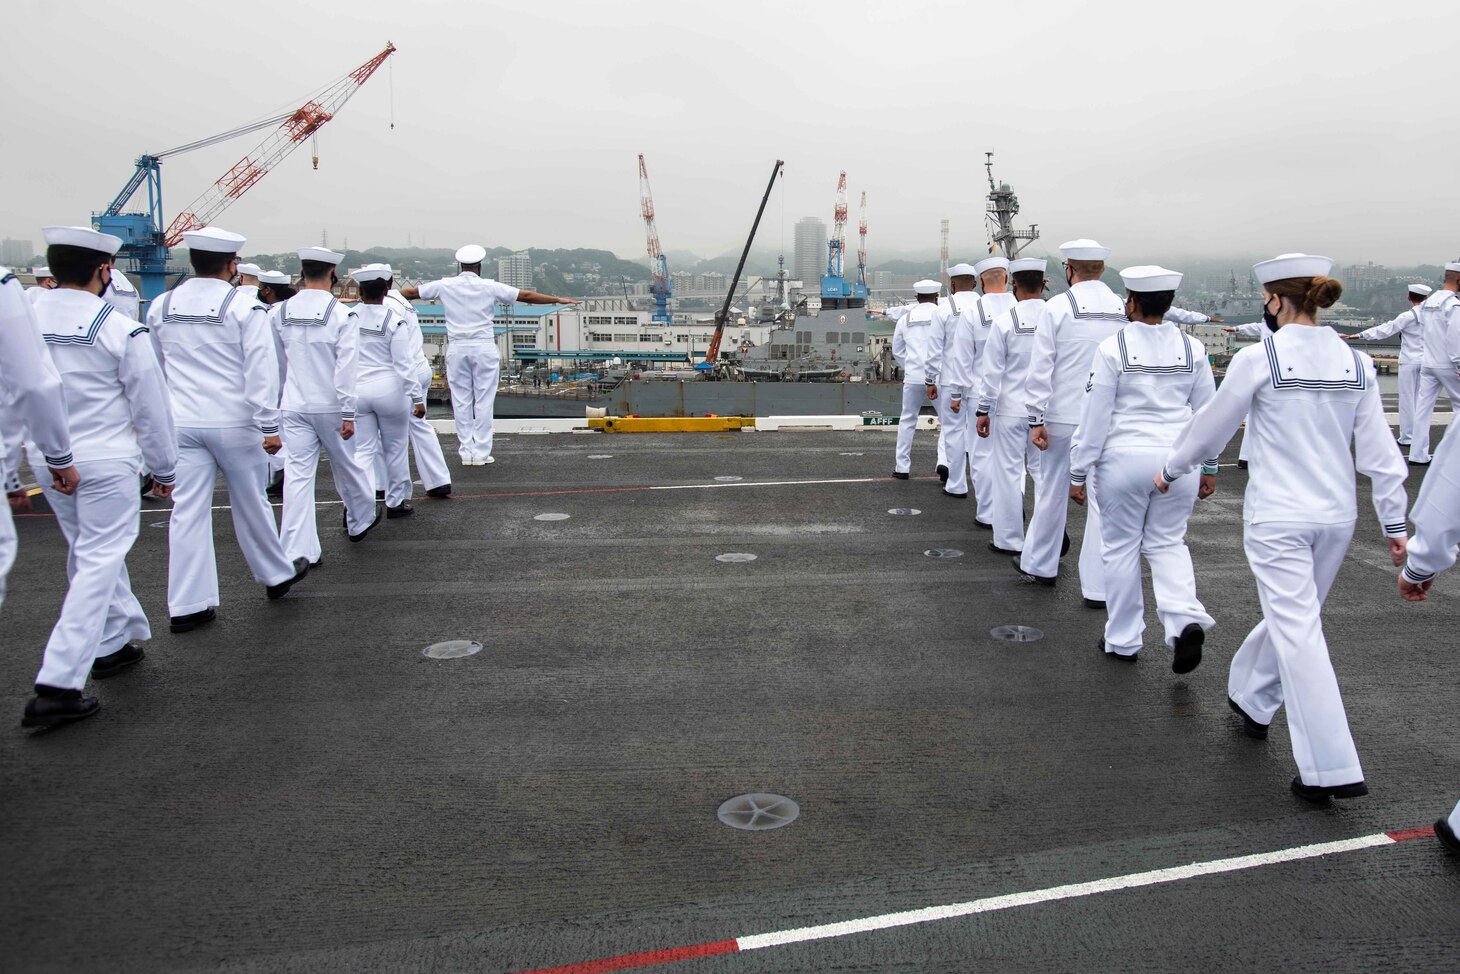 210519-N-WU964-1071 YOKOSUKA, Japan (May 19, 2021) Sailors man the rails on the flight deck of the U.S. Navy’s only forward-deployed aircraft carrier USS Ronald Reagan (CVN 76) as it departs Commander, Fleet Activities Yokosuka, Japan. Ronald Reagan, the flagship of Carrier Strike Group 5, provides a combat-ready force that protects and defends the United States, as well as the collective maritime interests of its allies and partners in the Indo-Pacific region. (U.S. Navy photo by Mass Communication Specialist Seaman Apprentice Dallas Snider)